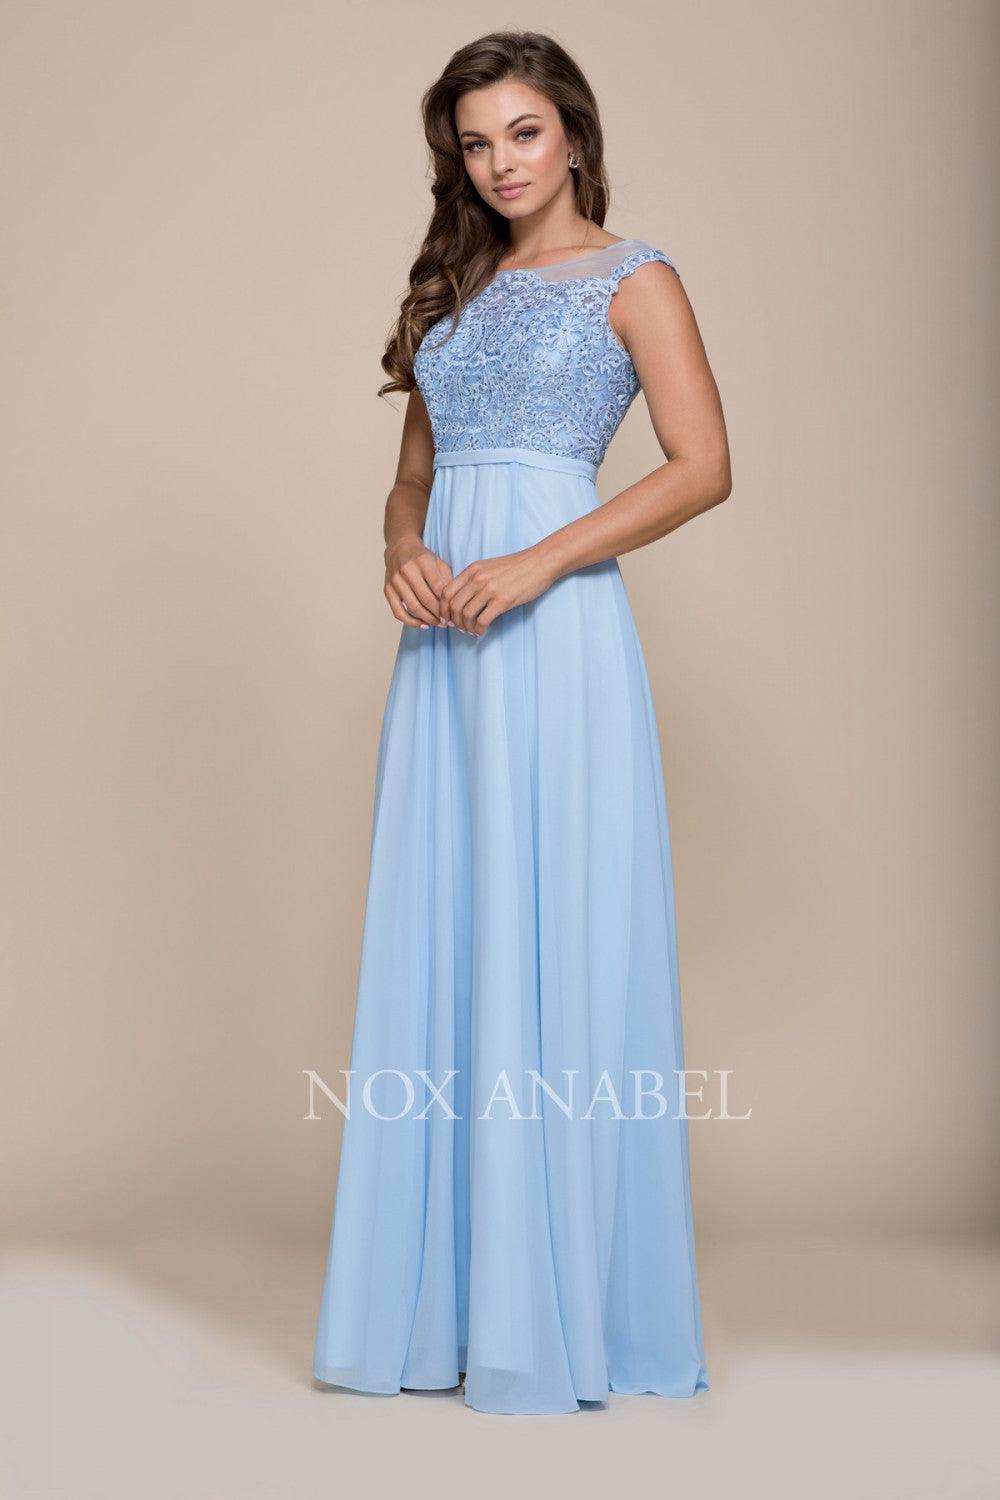 Long Formal Bridesmaid Prom Dress - The Dress Outlet Nox Anabel